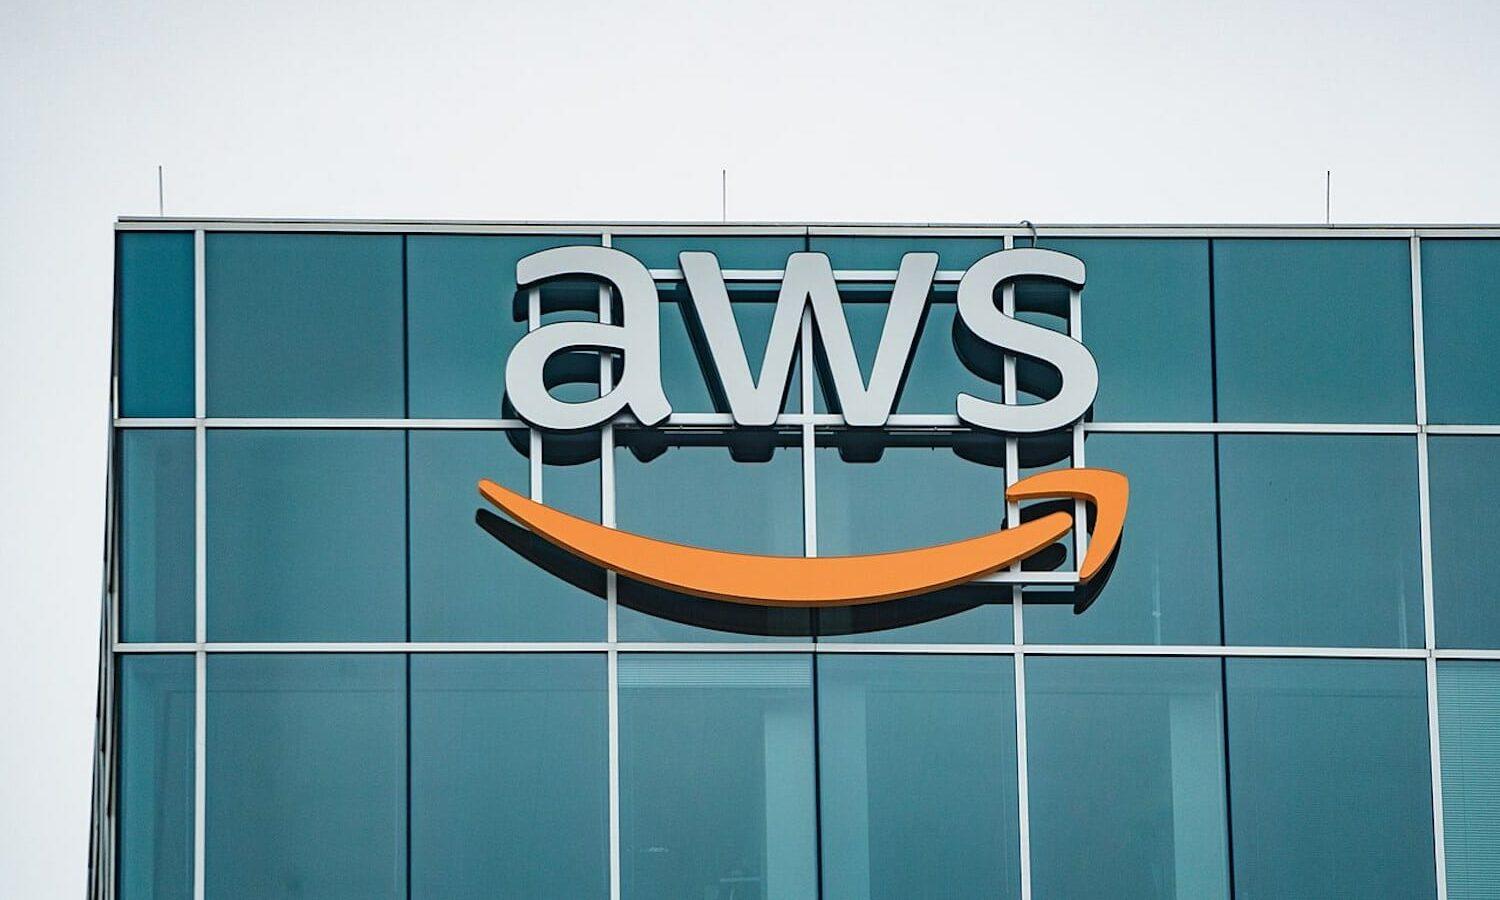 The Amazon Web Services (AWS) office at CityCentre Five, 825 Town and Country Lane, Houston, Texas.